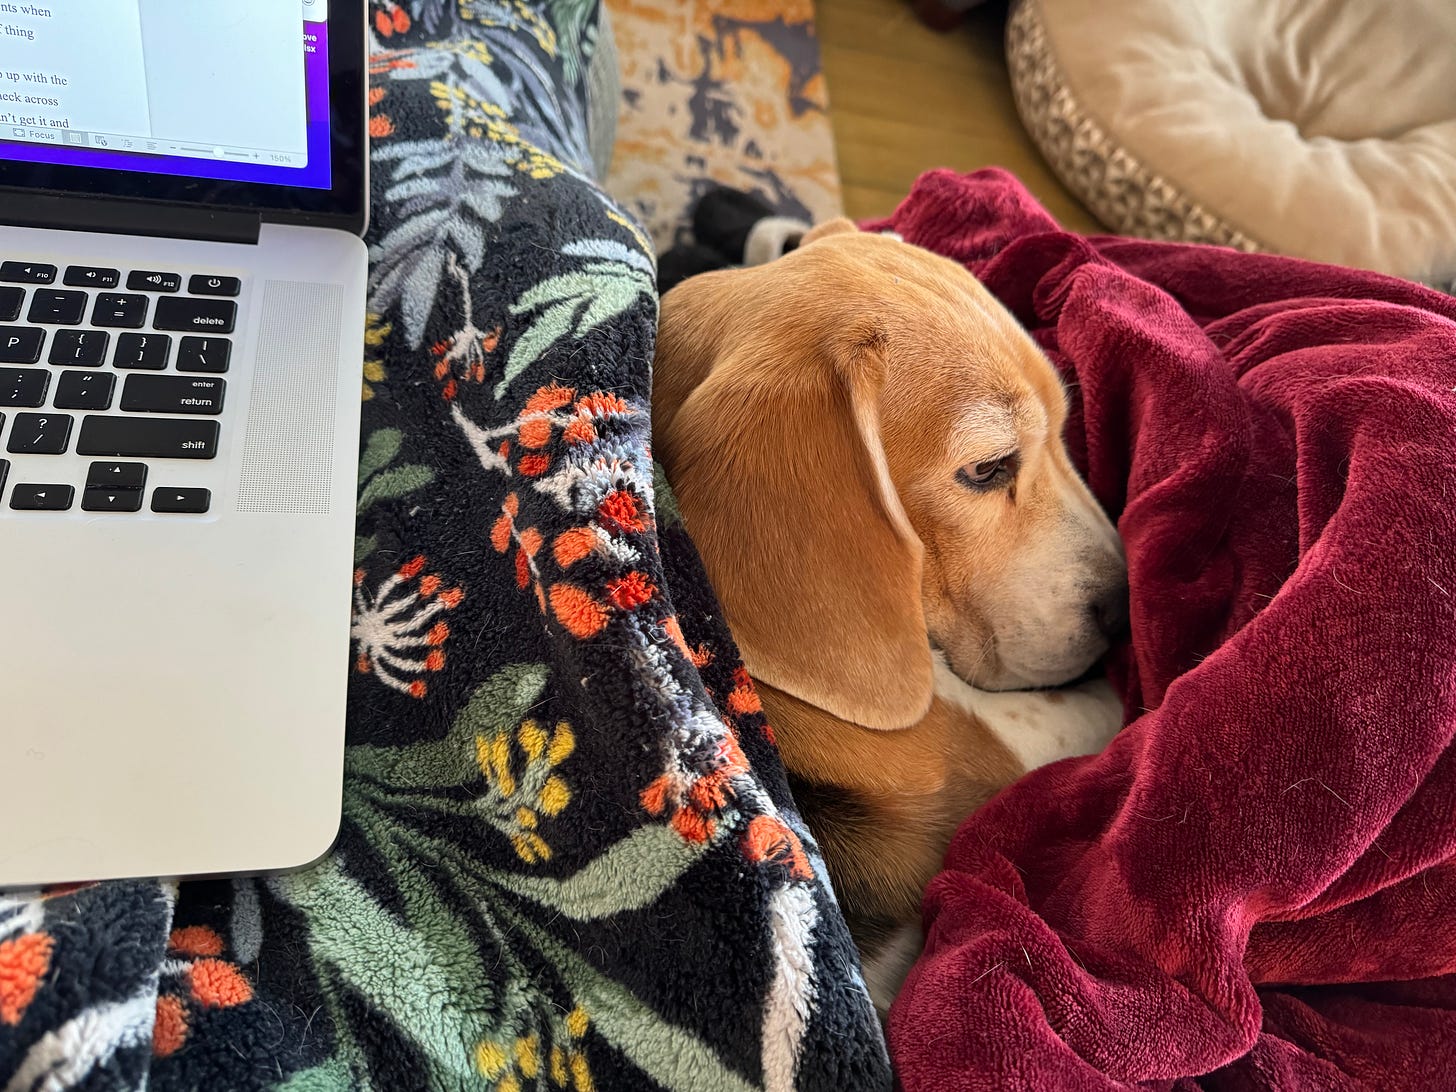 A cozy tricolor beagle curls up beneath some blankets on the couch, right next to my Mac laptop on my lap.